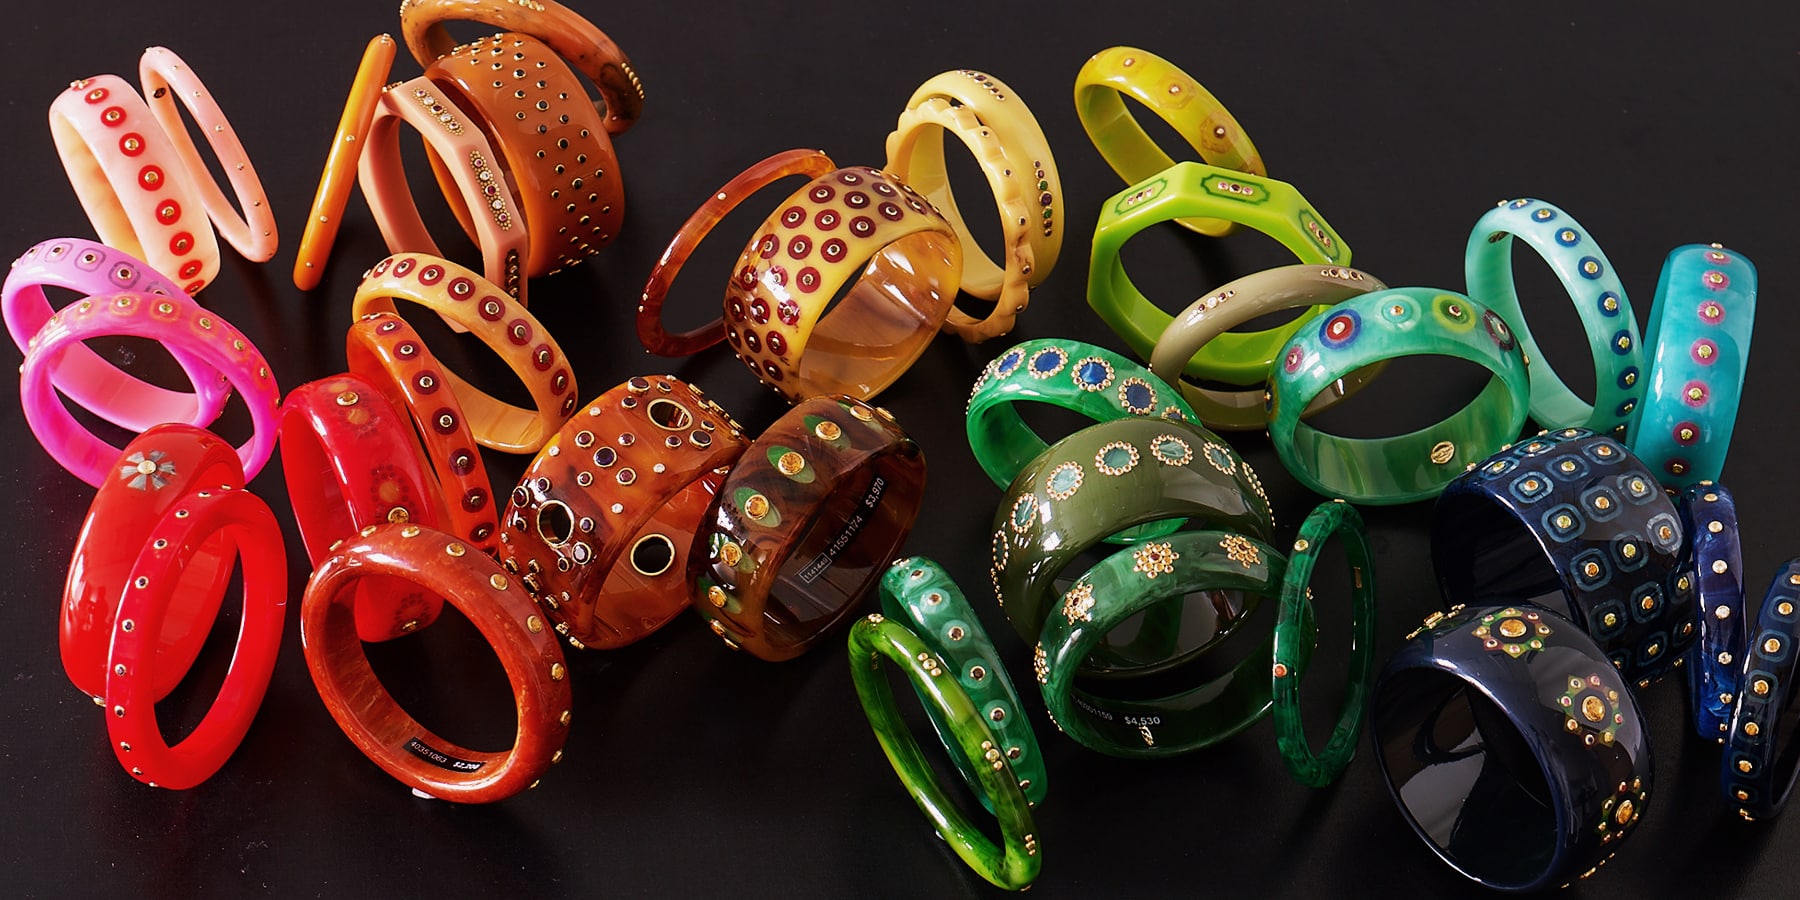 Mark Davis Is Bringing Bakelite Jewelry Back In Fashion 1stdibs Introspective,How Many Quarters In A Dollar